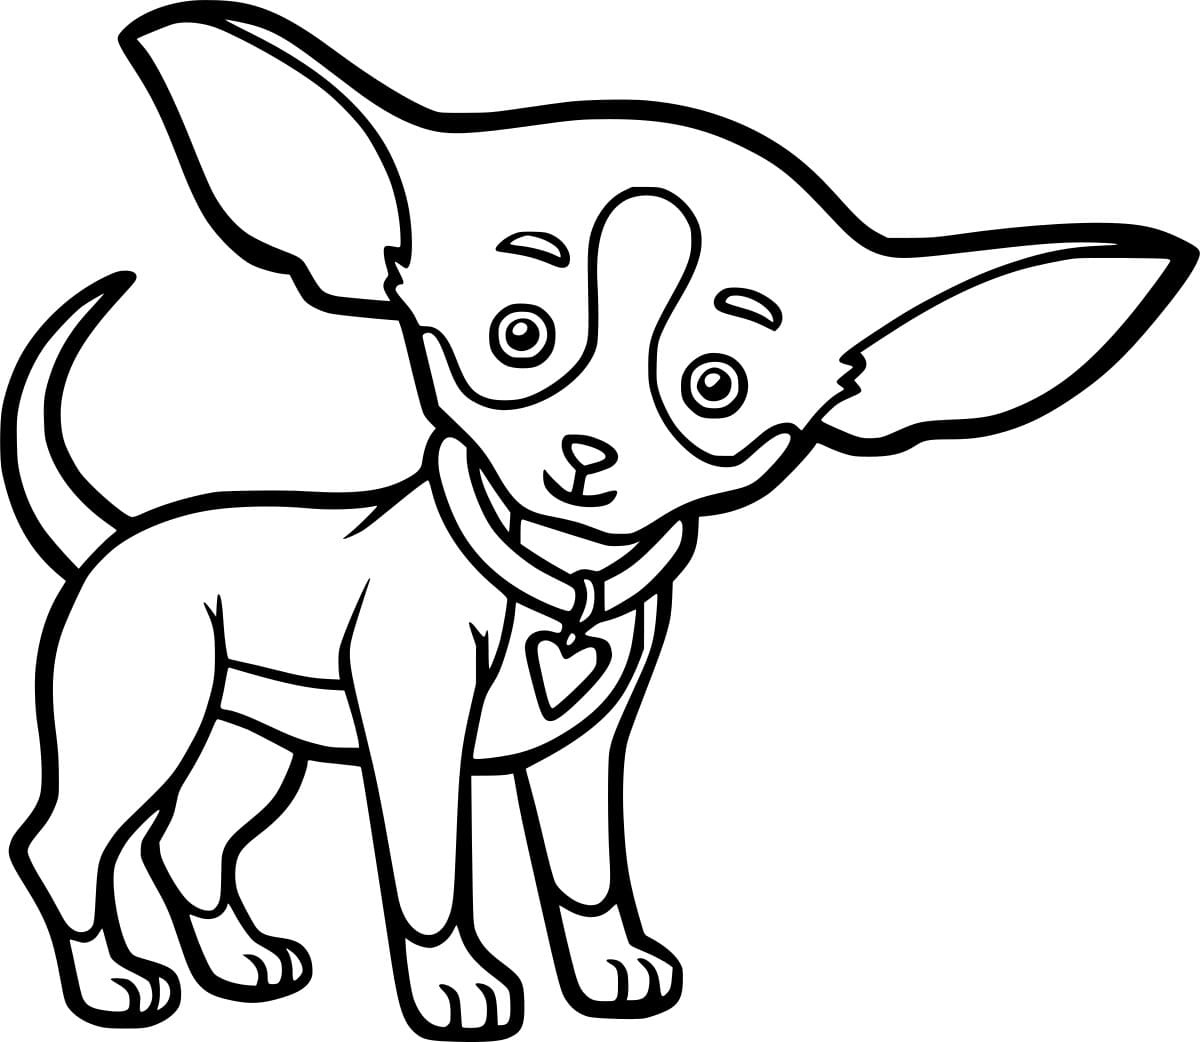 Big Ears Chihuahua Coloring Page